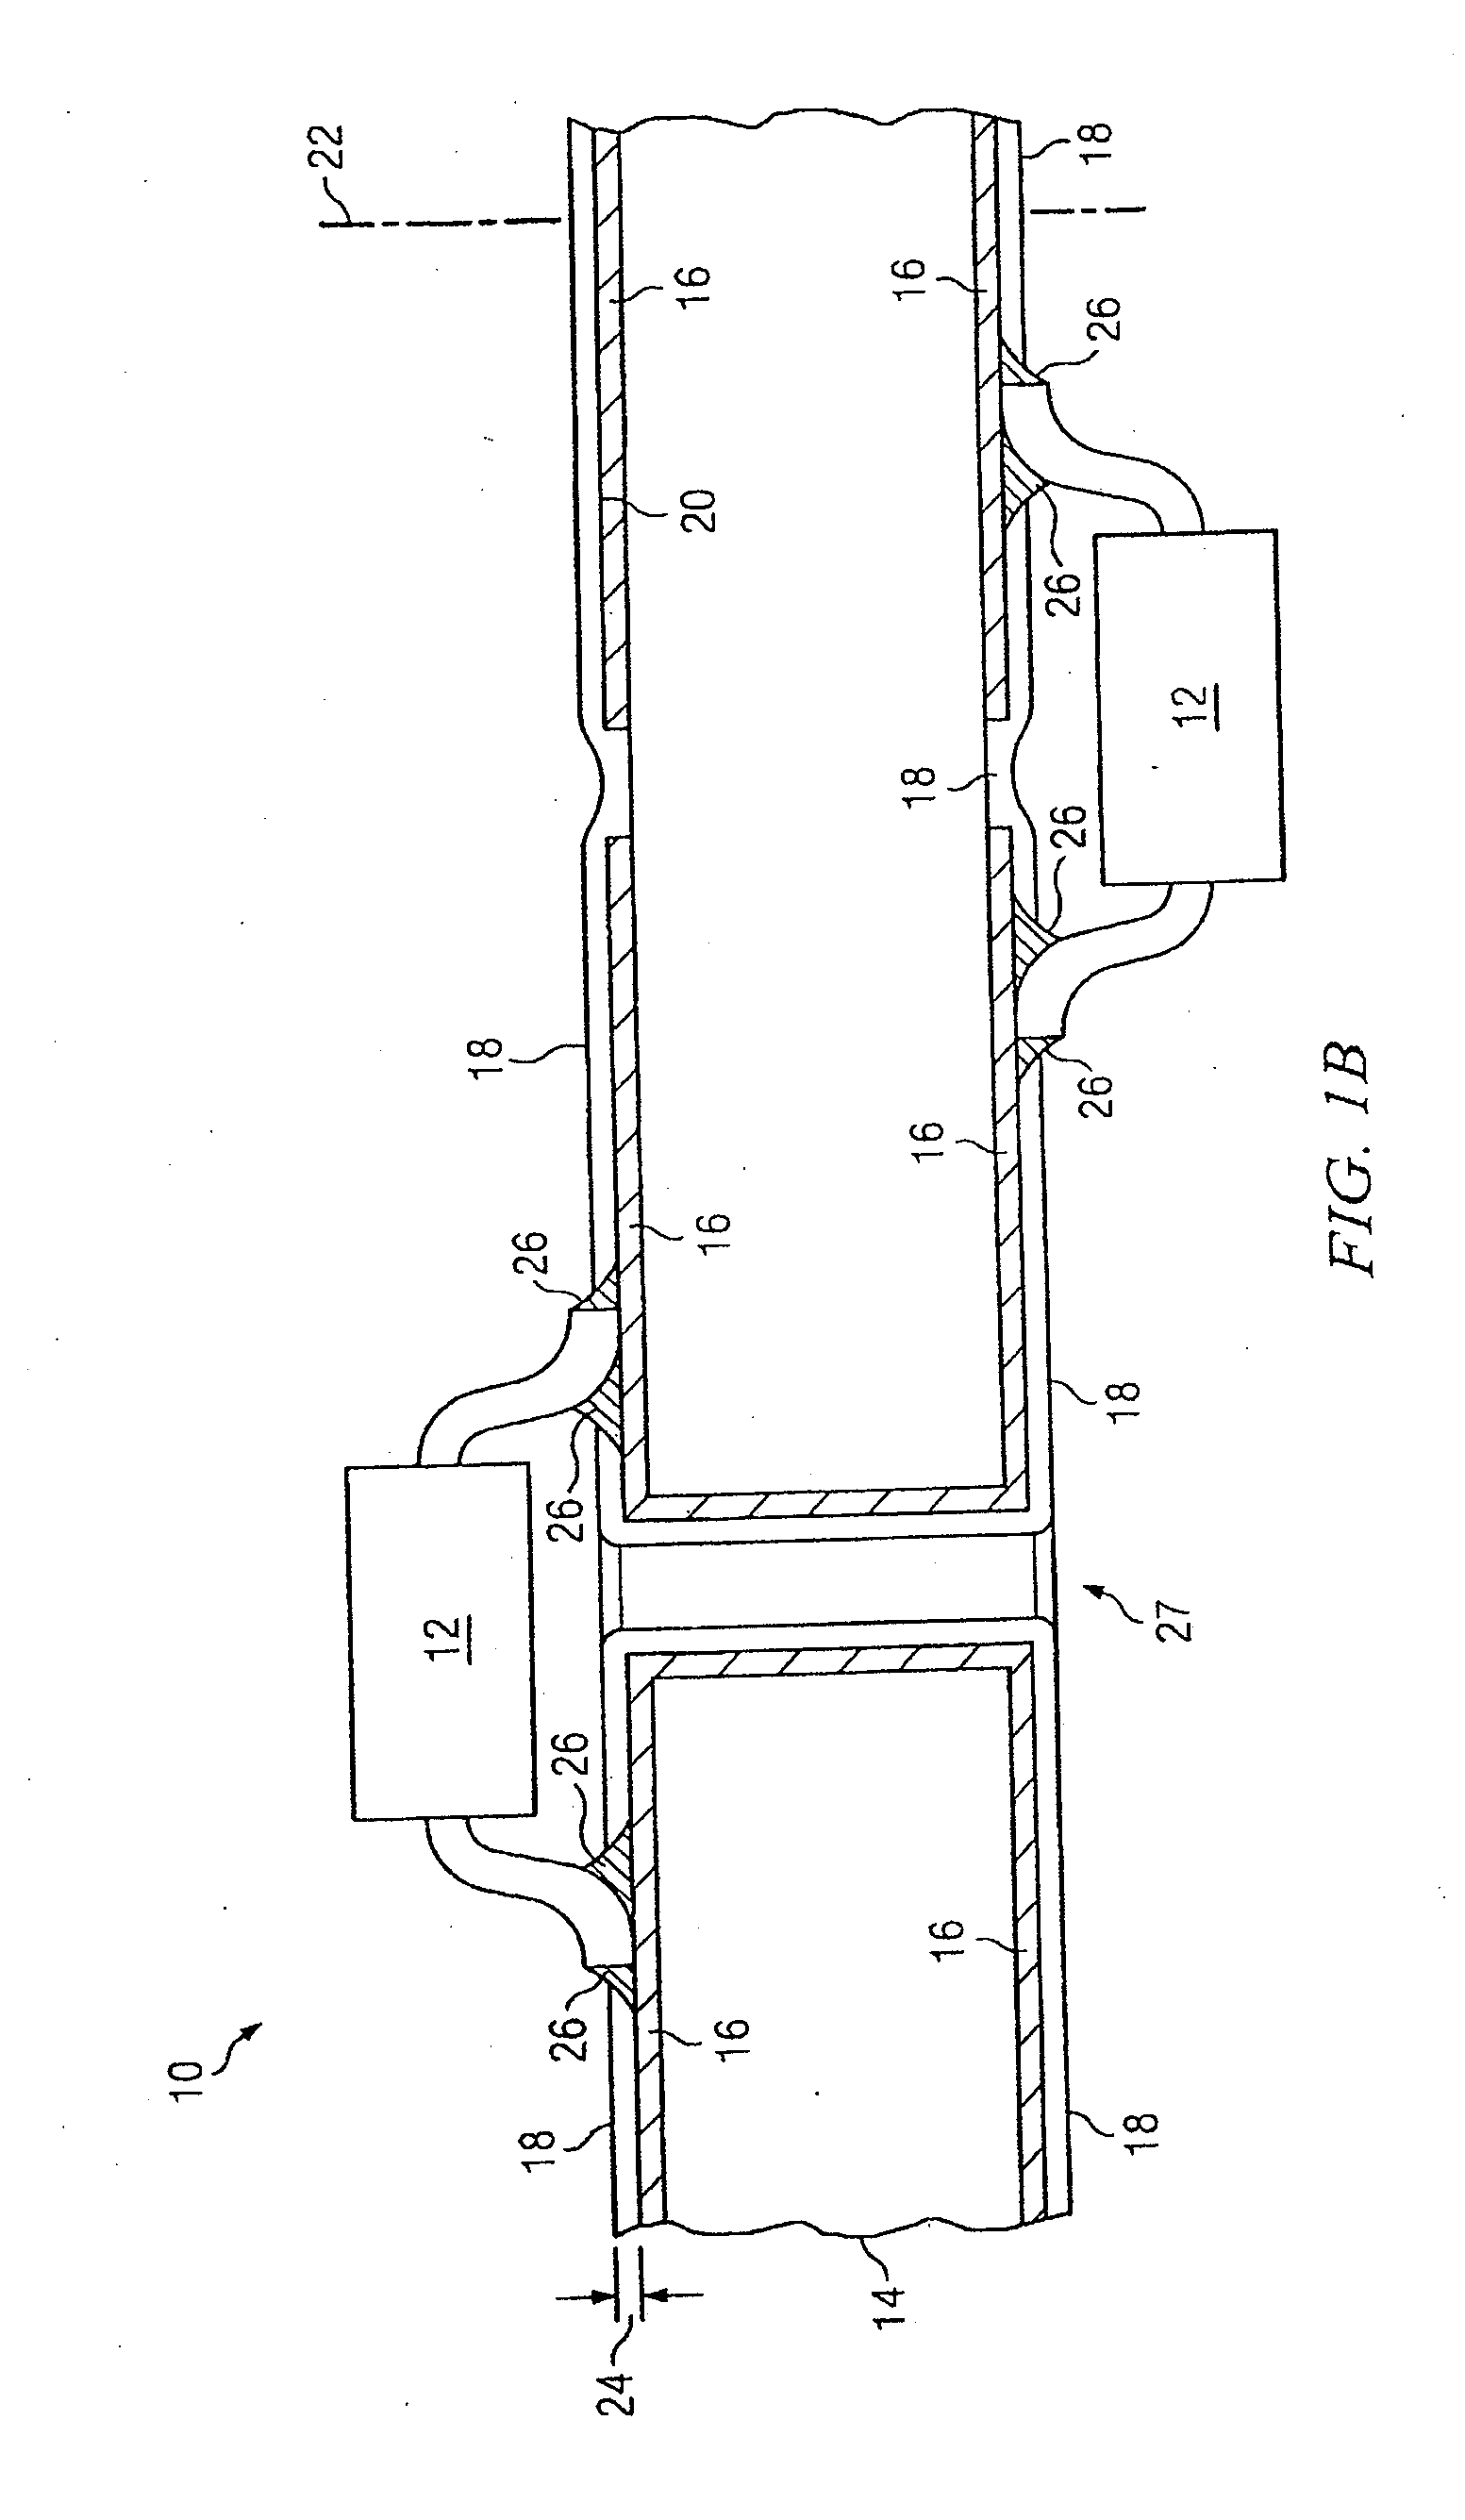 Apparatus with a Wire Bond and Method of Forming the Same